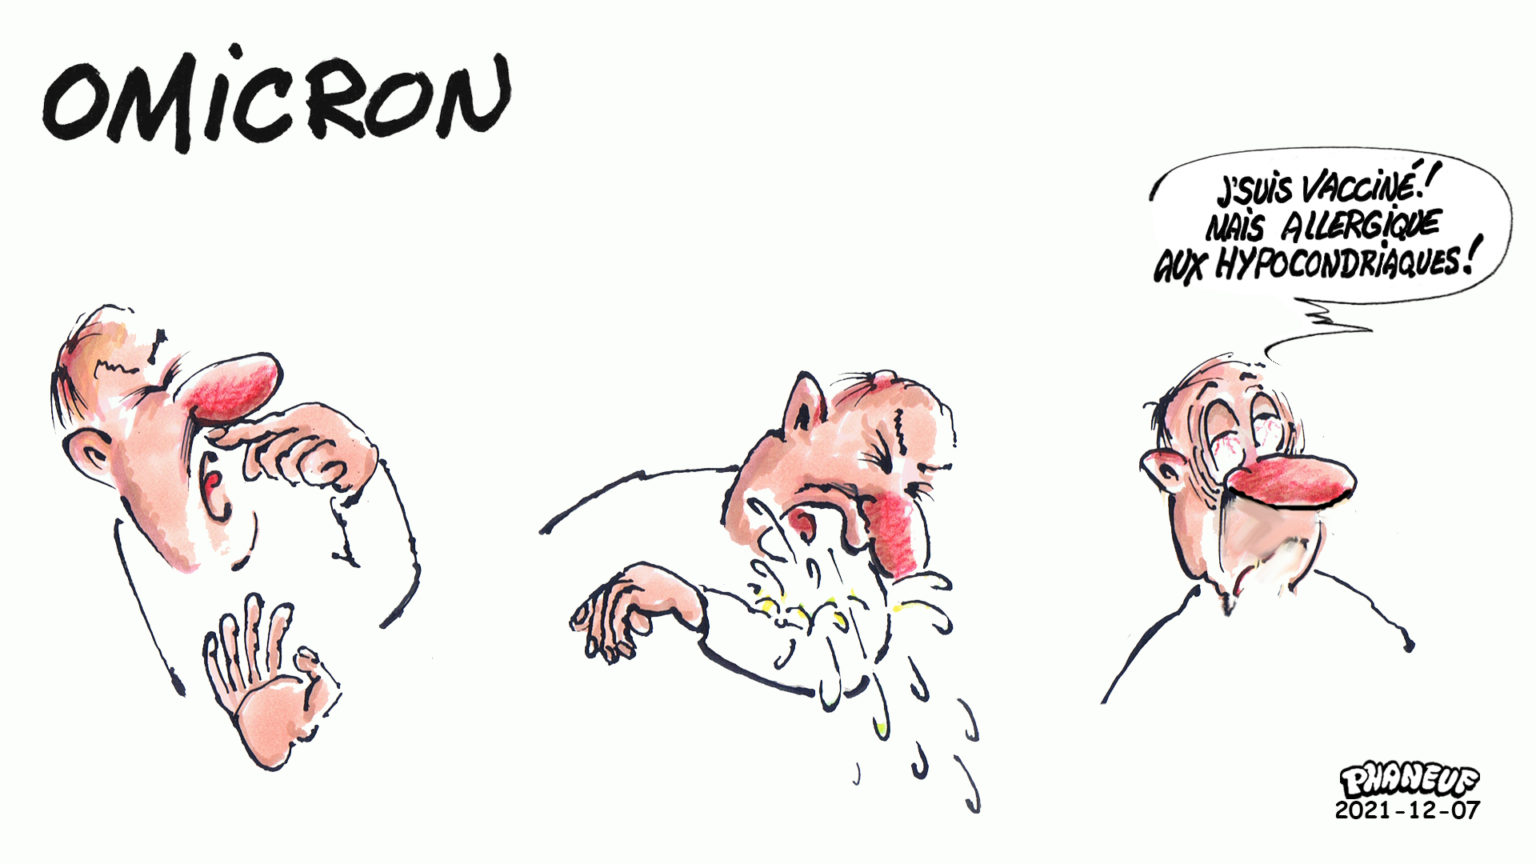 Caricatures .... - Page 3 2021-12-07-OMICRON-1536x864